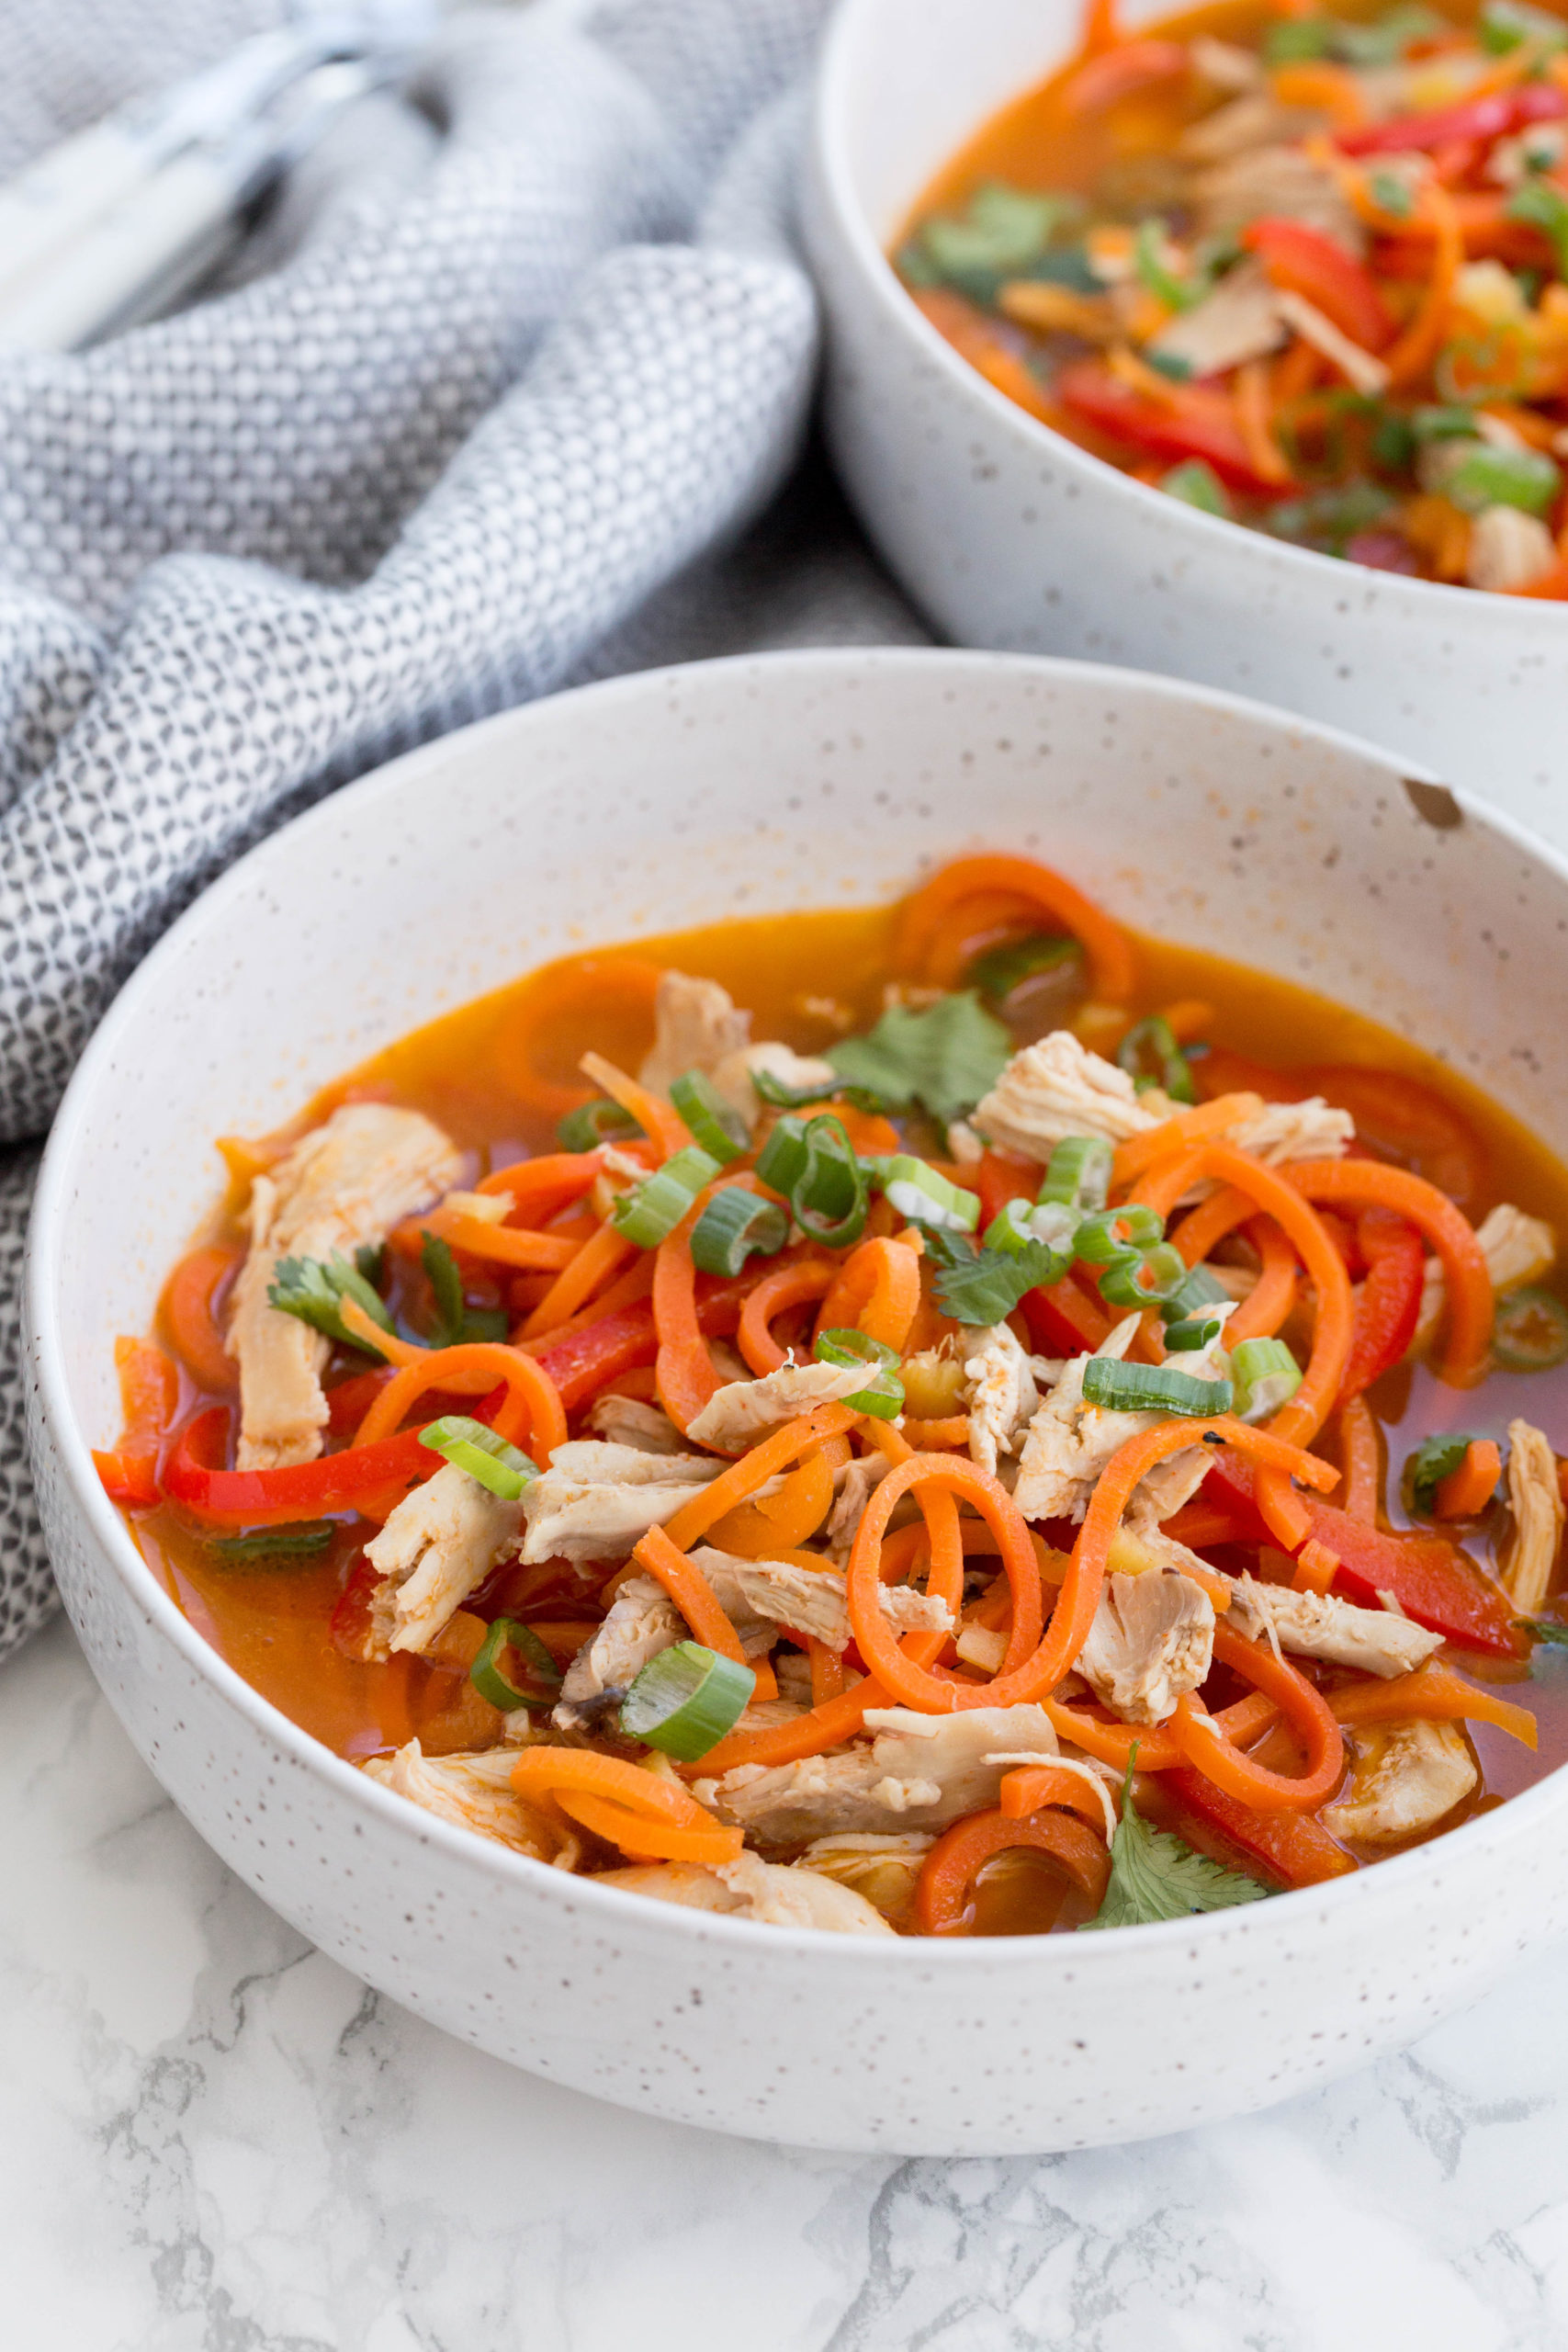 Spicy Asian Chicken Carrot Noodle Soup